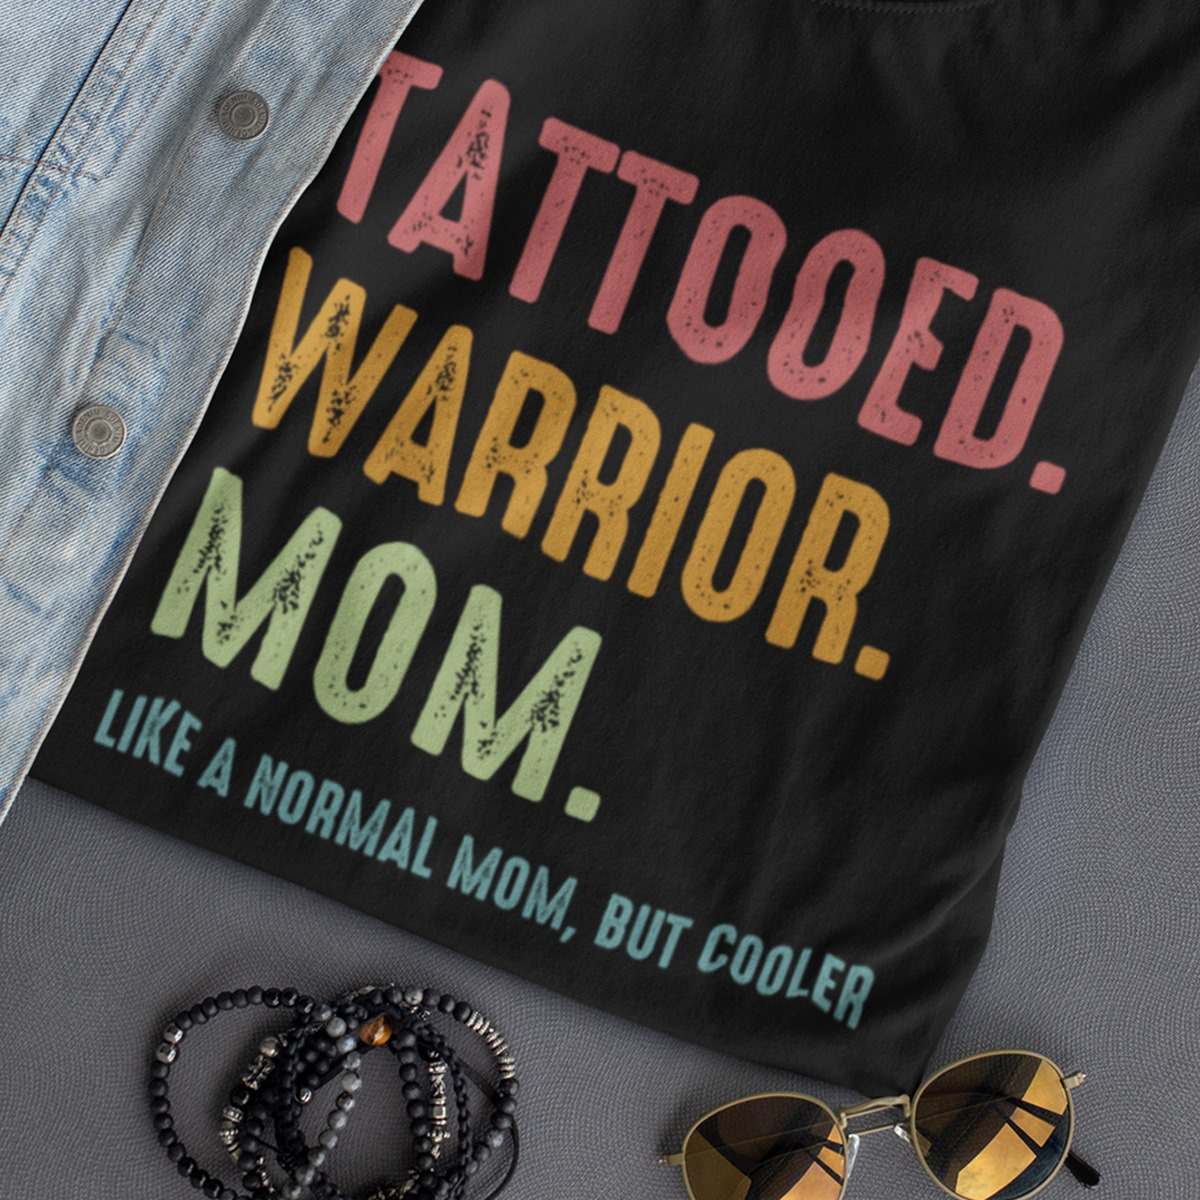 Tattooed warrior mom like a normal mom, but cooler - Mother's day gift, tattooed mom